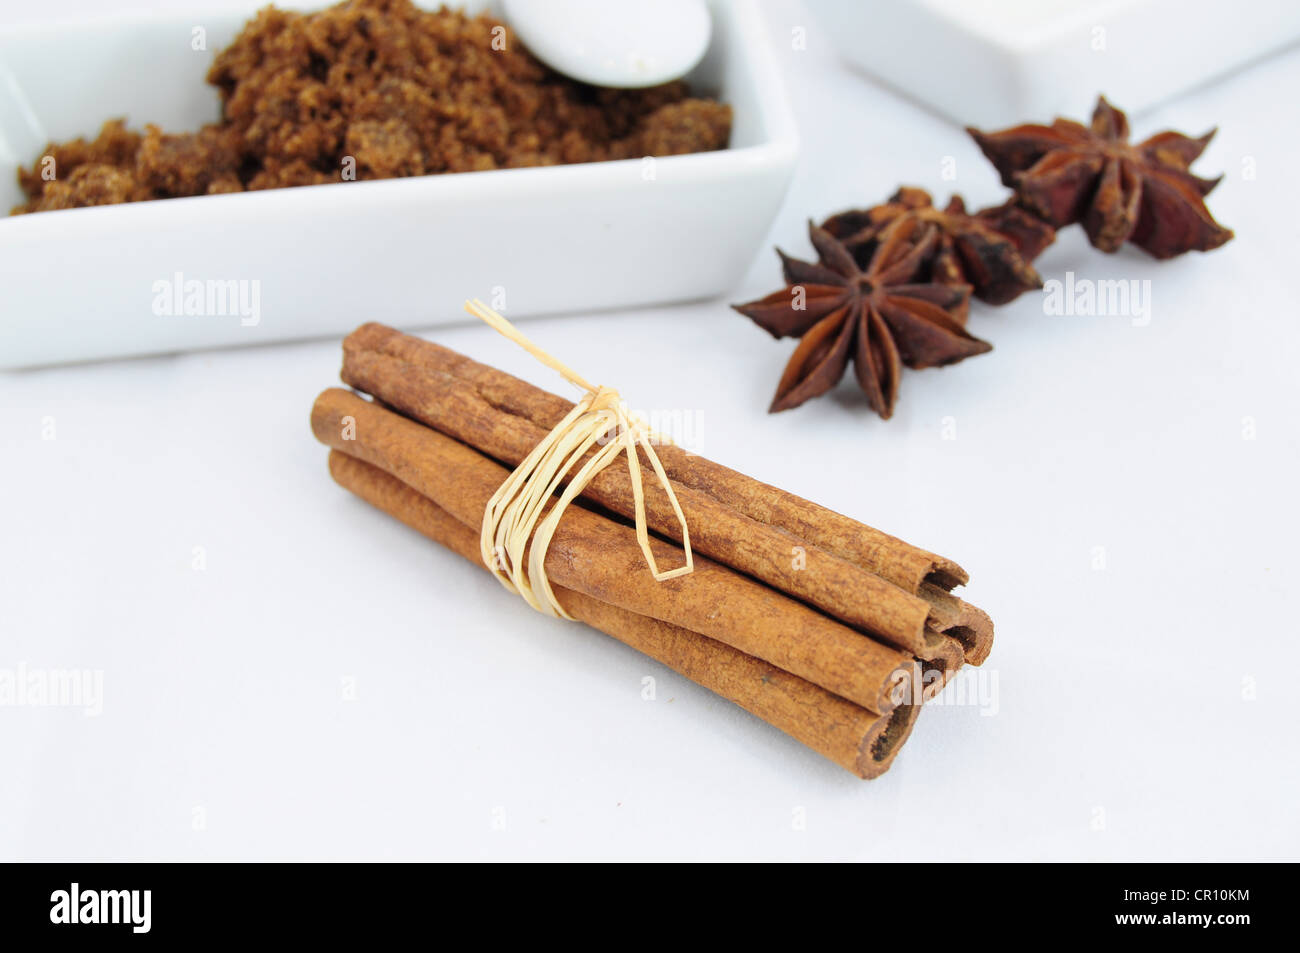 Cinnamon sticks, anise and bowl brown sugar in the background Stock Photo